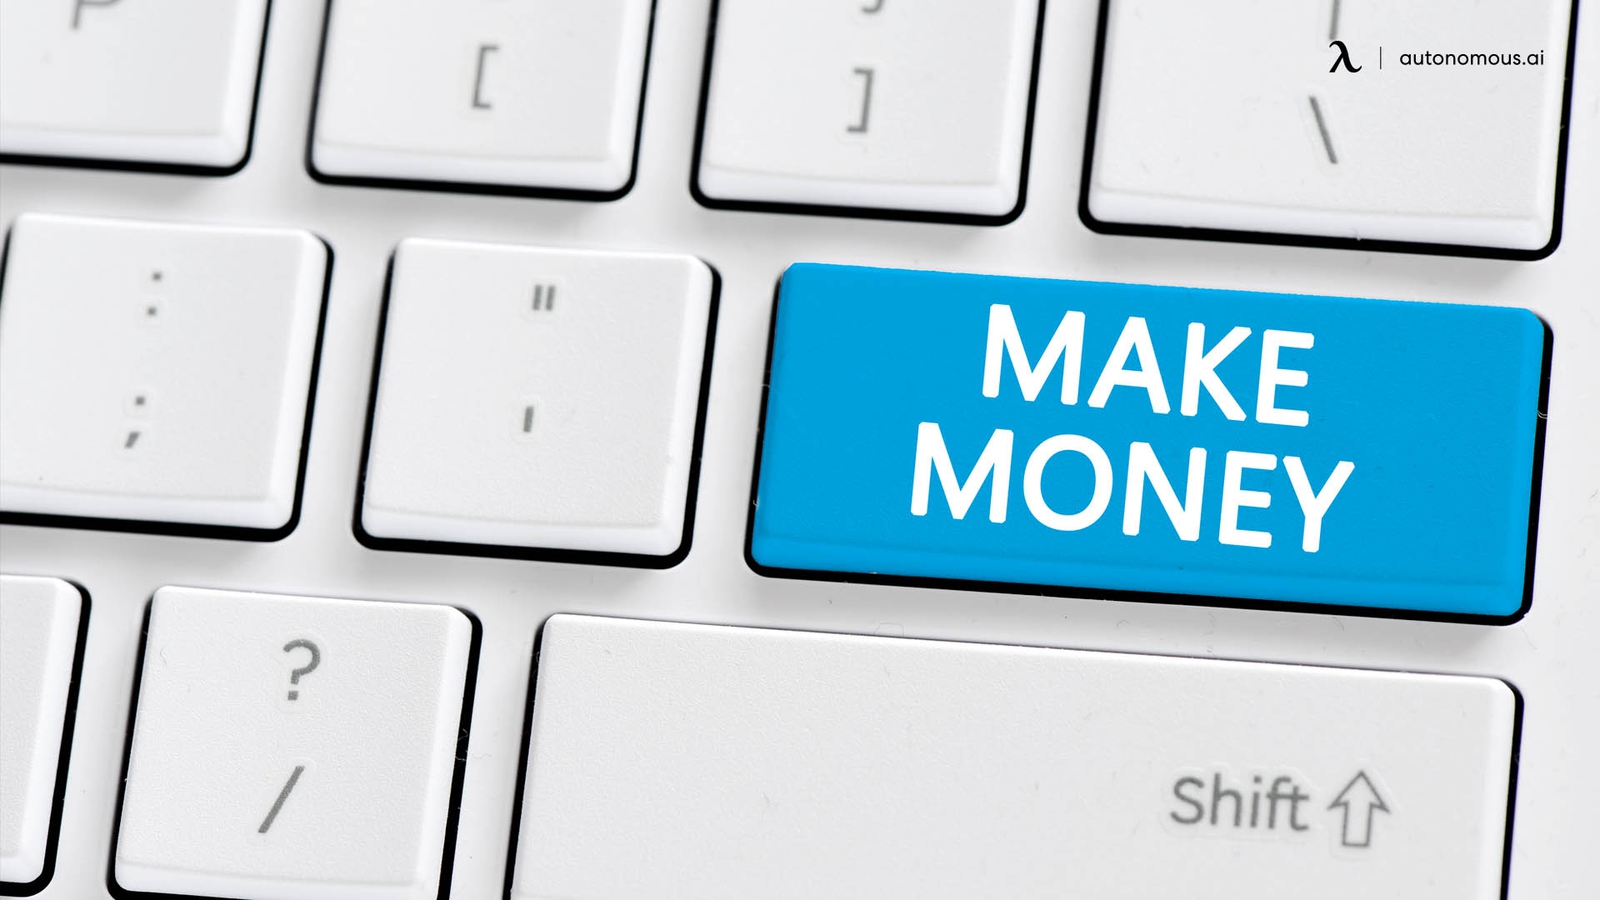 7 Easy Side Jobs to Make Money Part-Time